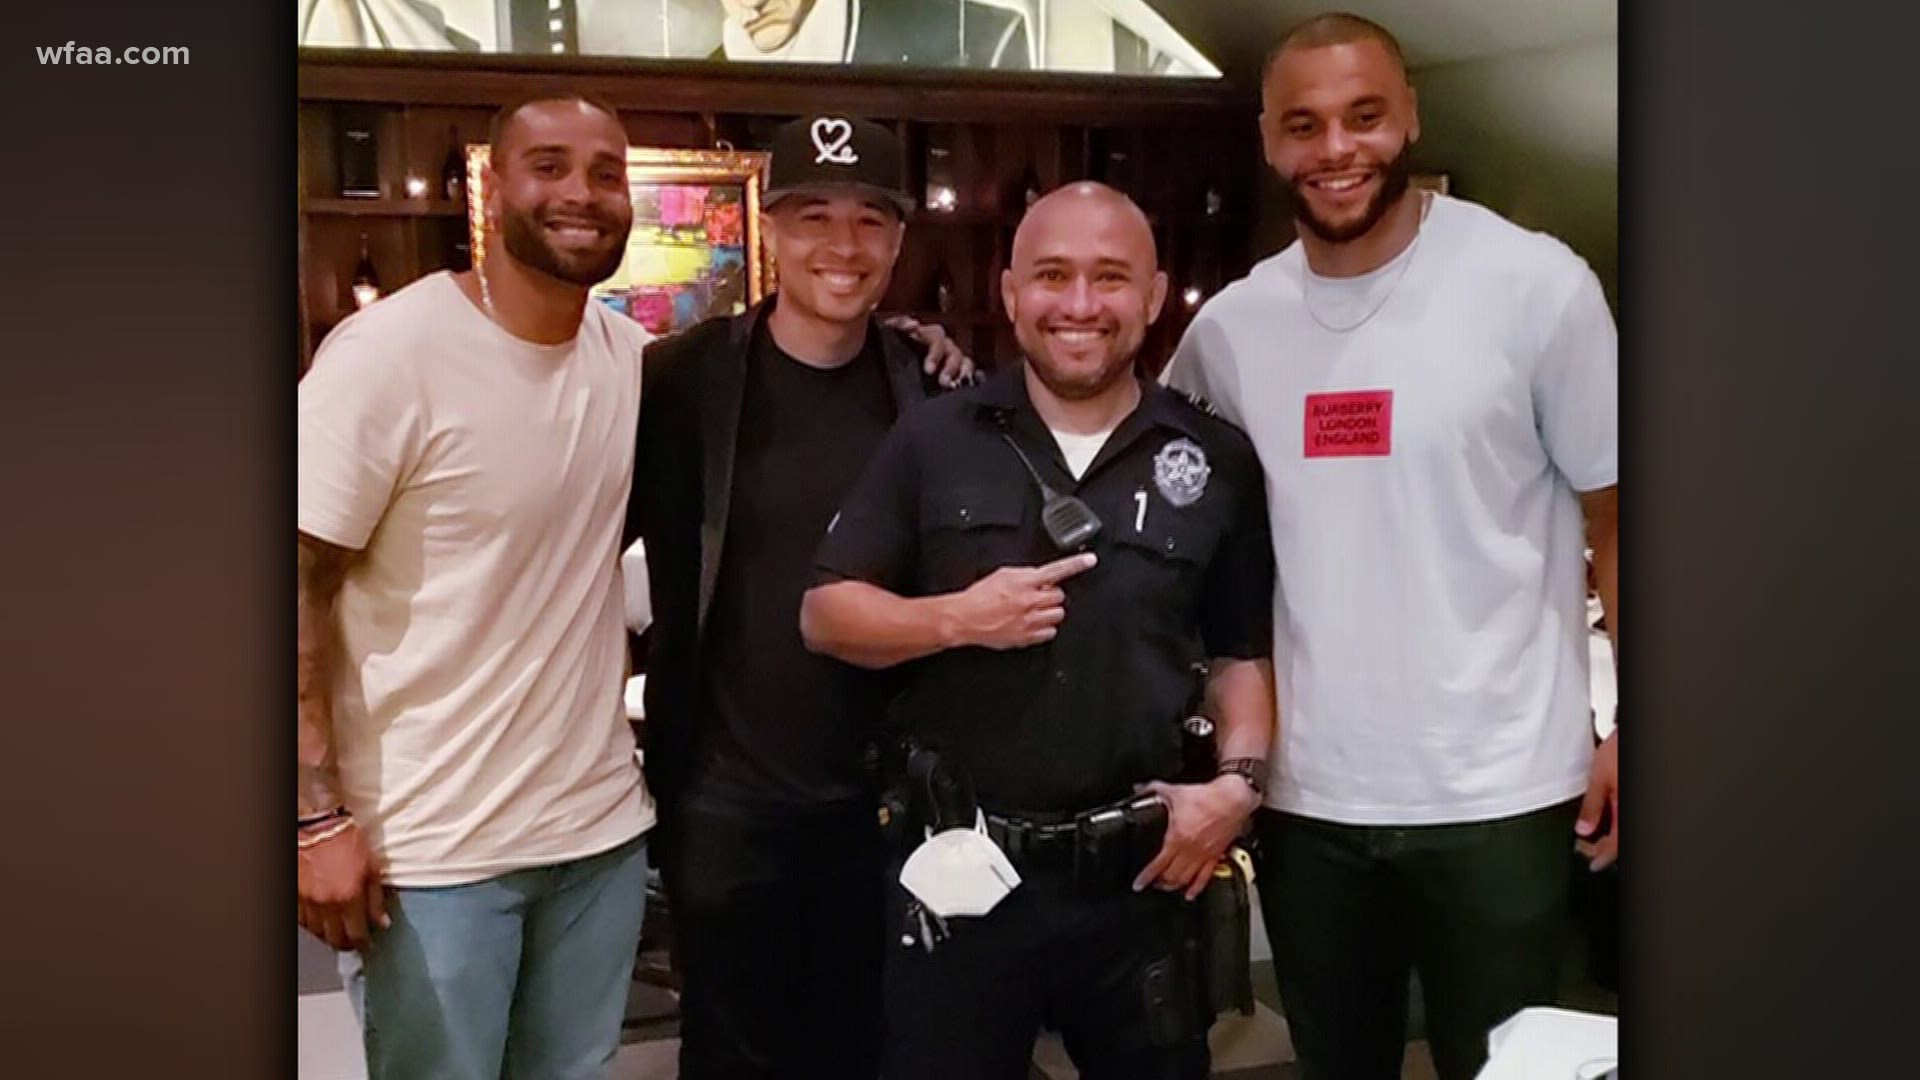 Dak Prescott invited Dallas police officer Jaime Castro to join the dinner table and take part in a healthy dialogue about police work.